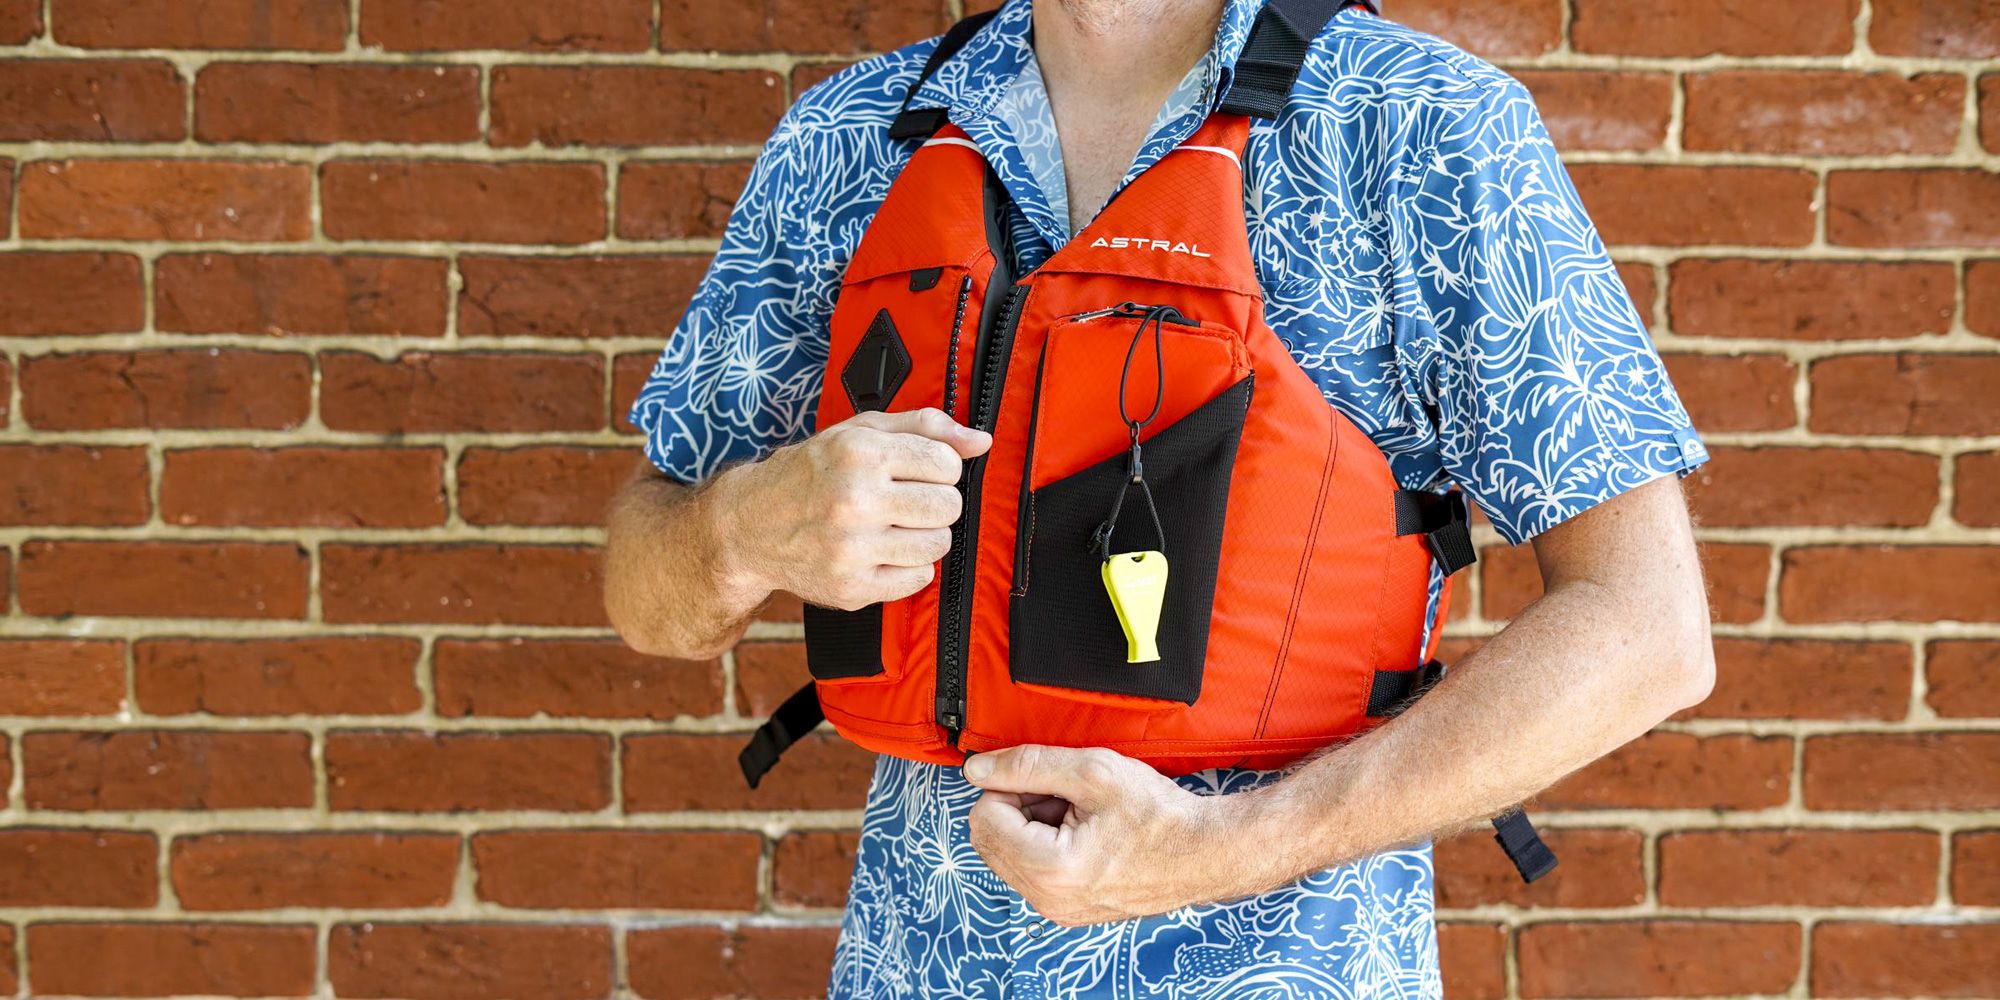 Top Safety Oversized Adult Life Jacket Auto Inflatable L XL XXL